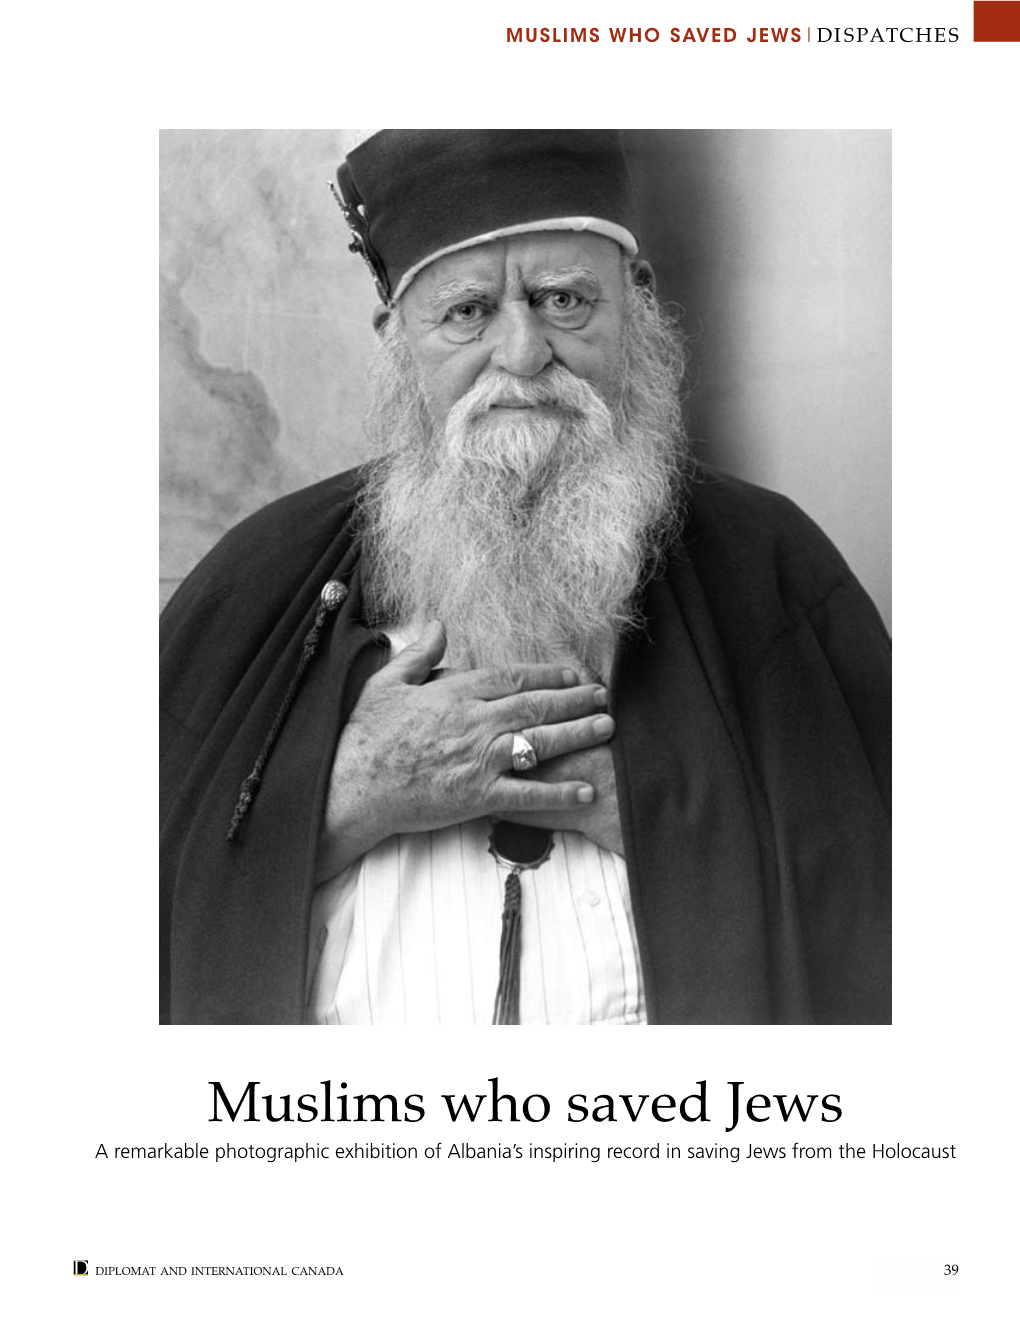 Muslims Who Saved Jews|Di Spatches